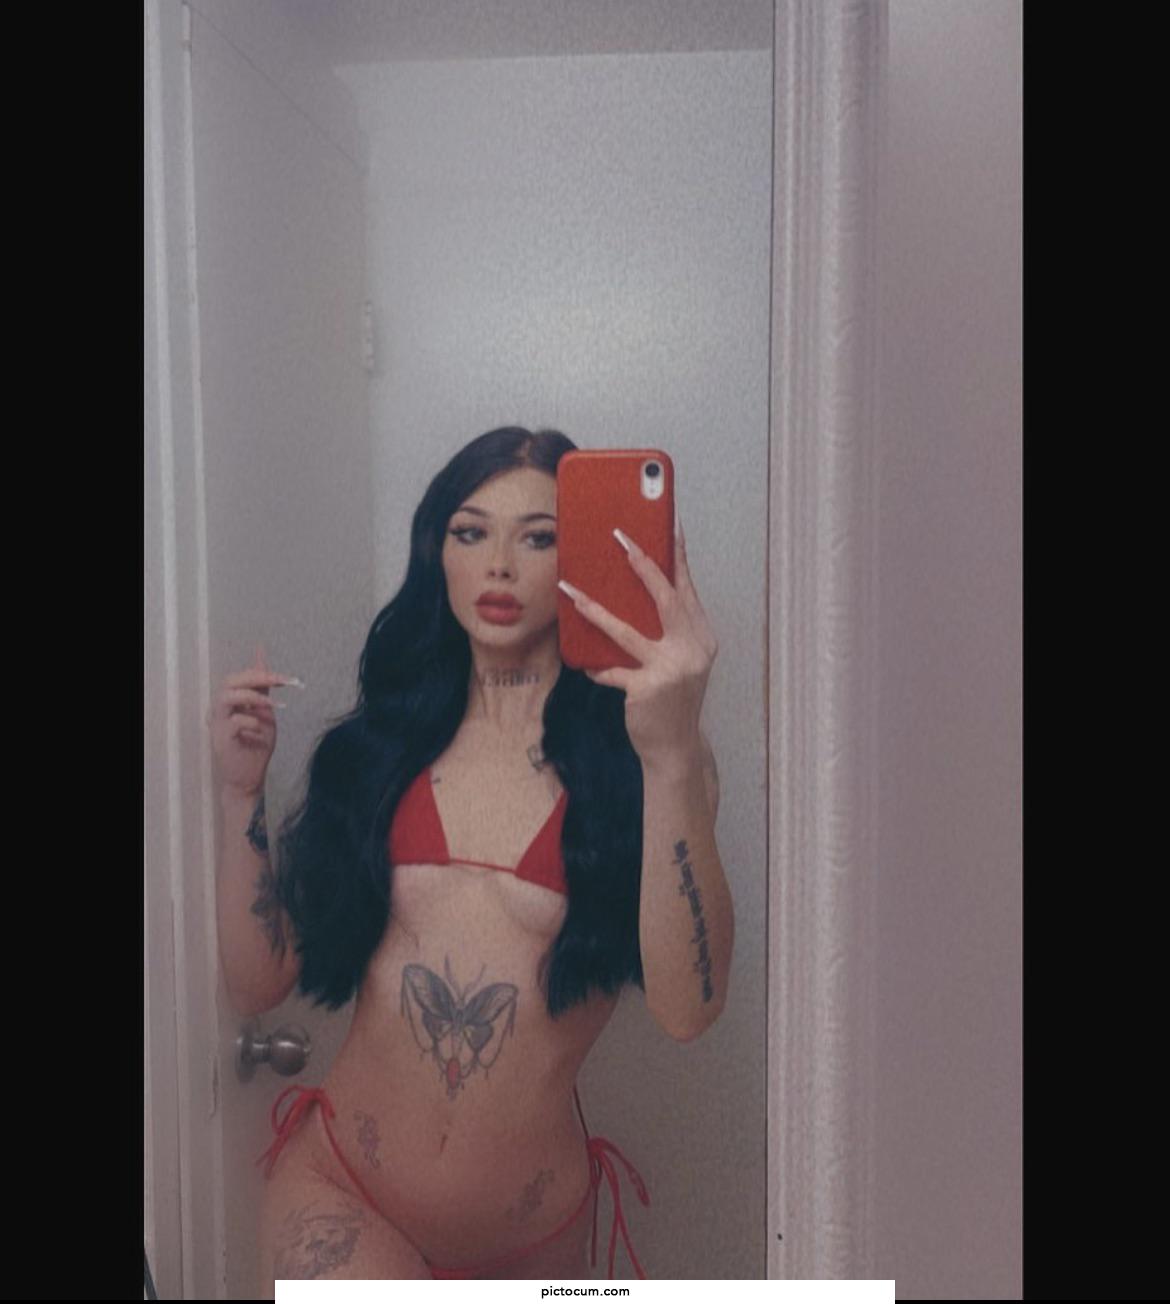 Hii I’m mandie 🧖🏻‍♀️ it’s free subscription to my onlyfanz squirting vids / anal vids / drates / custom videos etc 😌❤️🥵 lnk in commnts!! 🥺snnpp!